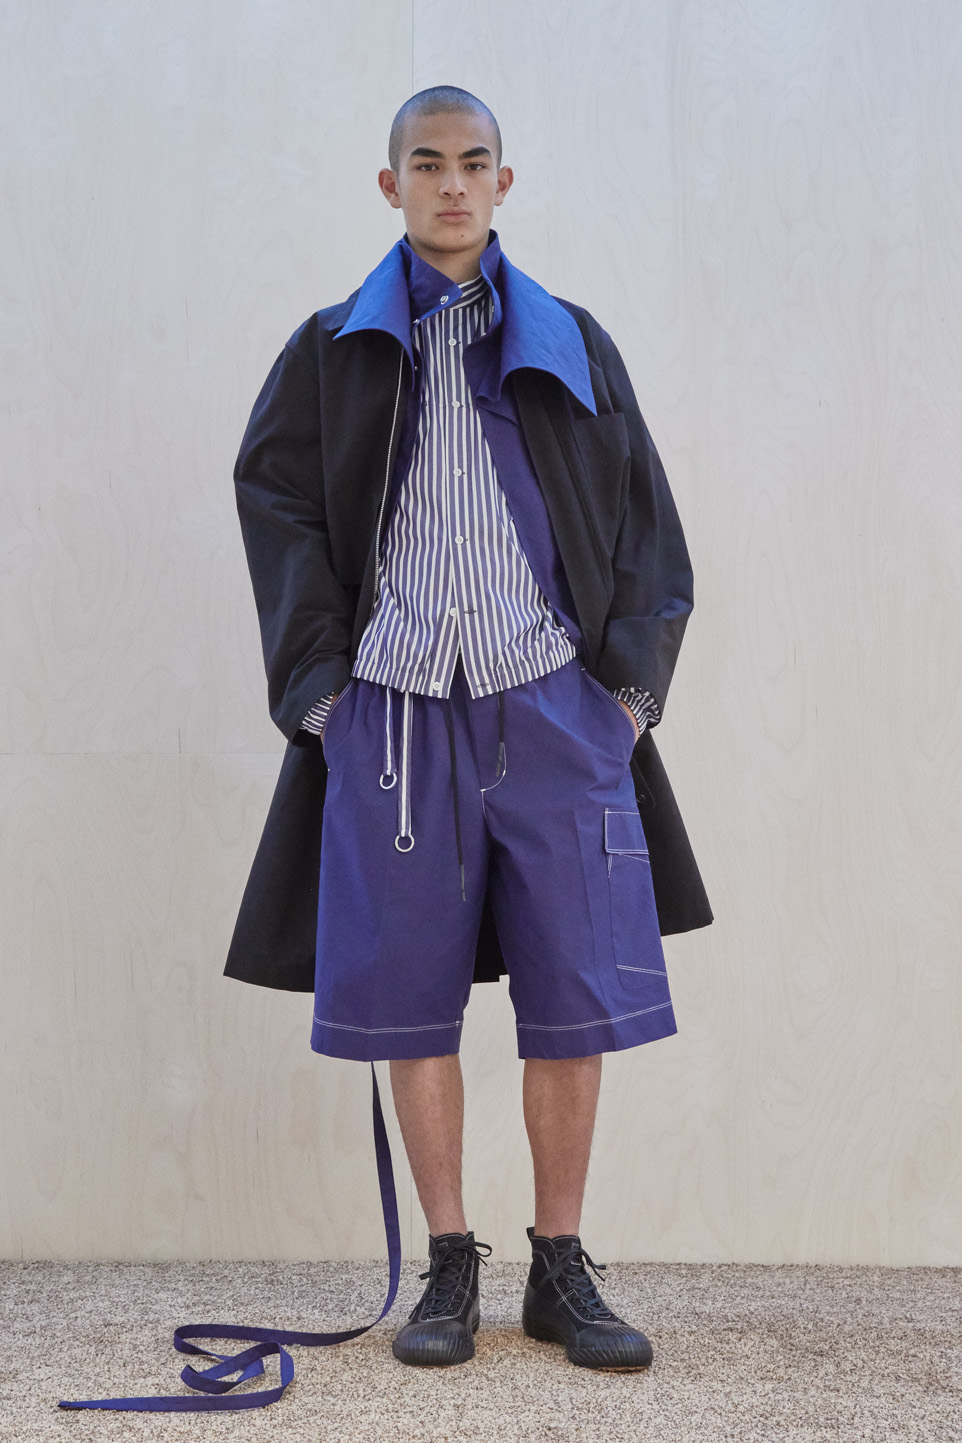 Plim FW19 Mens Collections Lores 09 3.1 phillip lim fall 2019